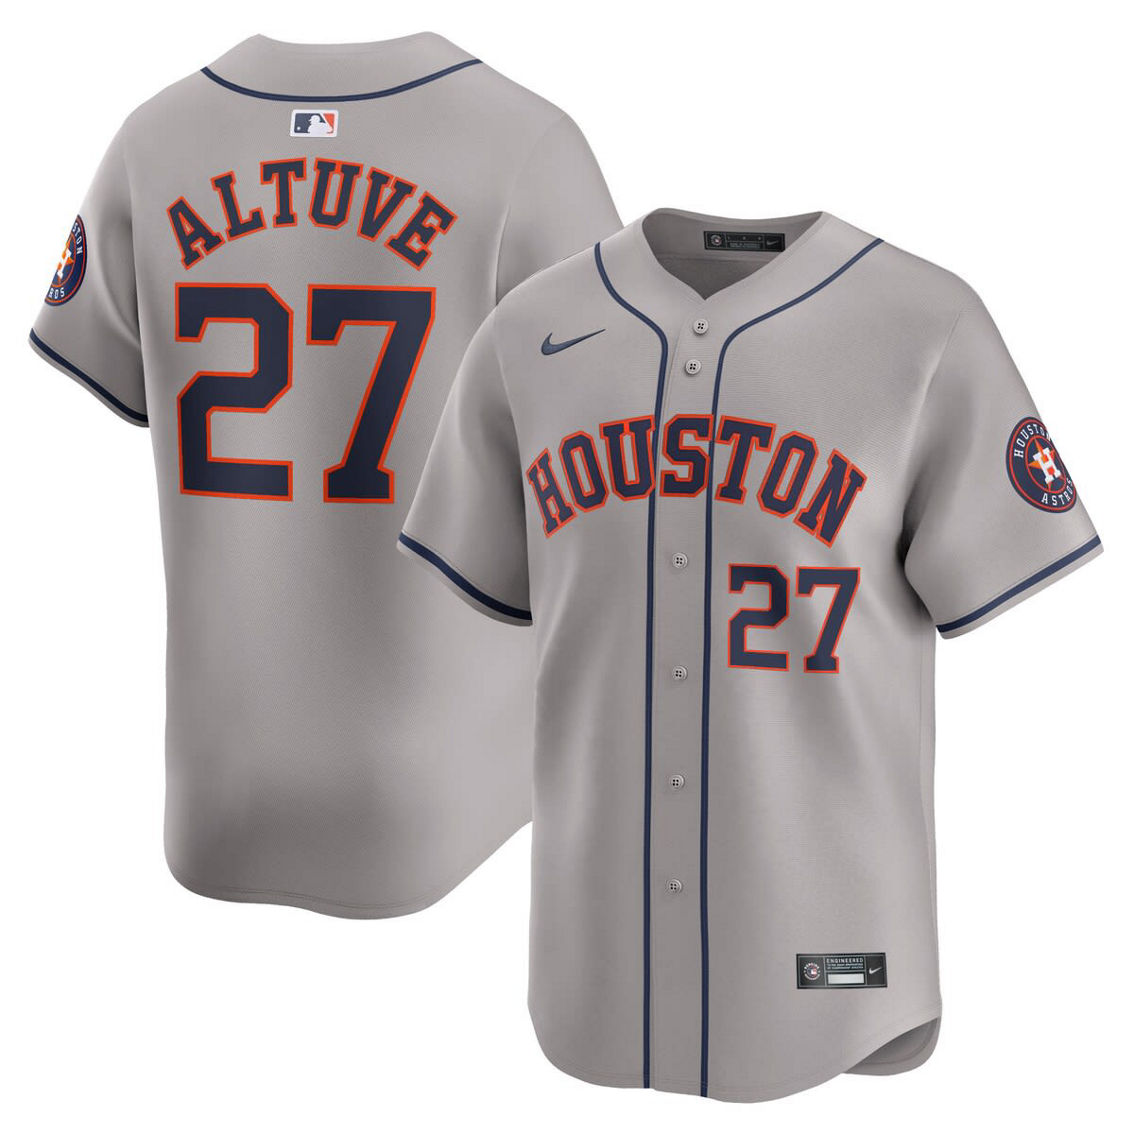 Nike Men's Jose Altuve Gray Houston Astros Away Limited Player Jersey - Image 2 of 4